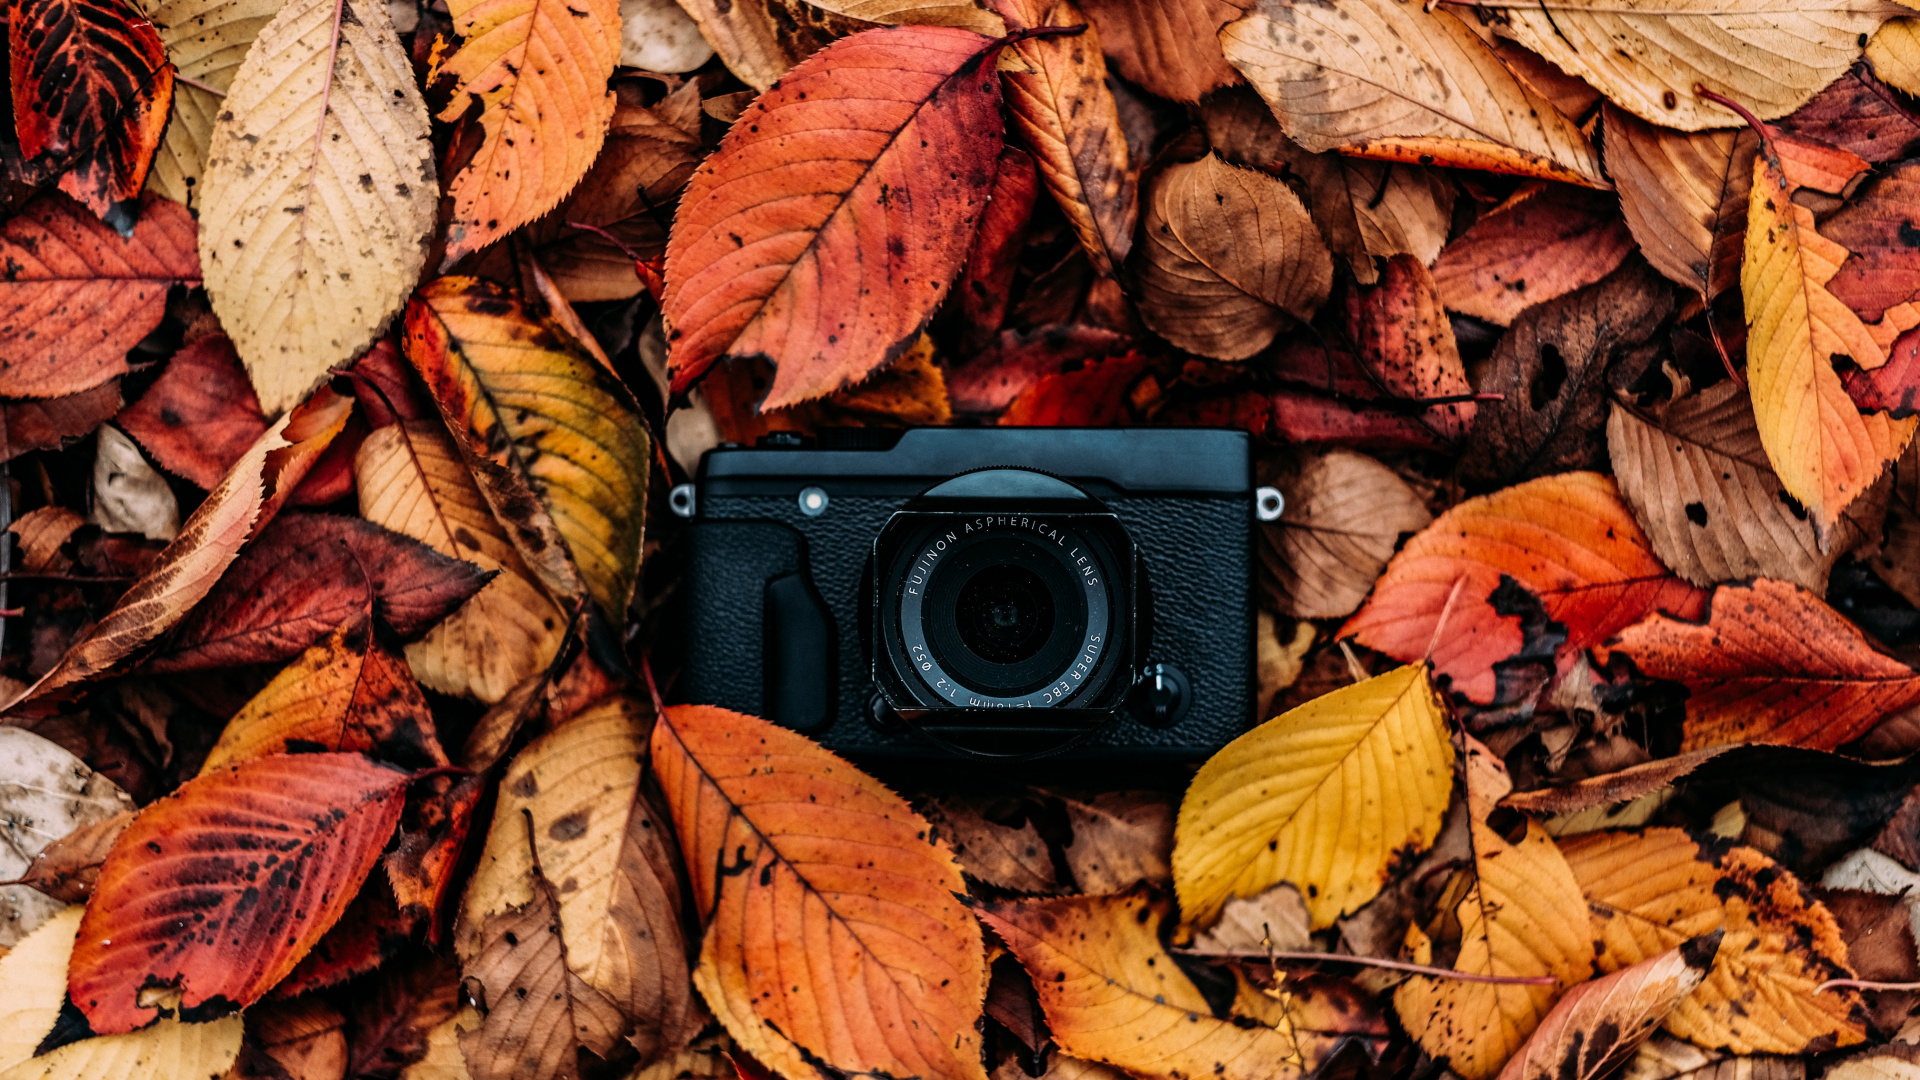 Black Camera on Dried Leaves. Wallpaper in 1920x1080 Resolution